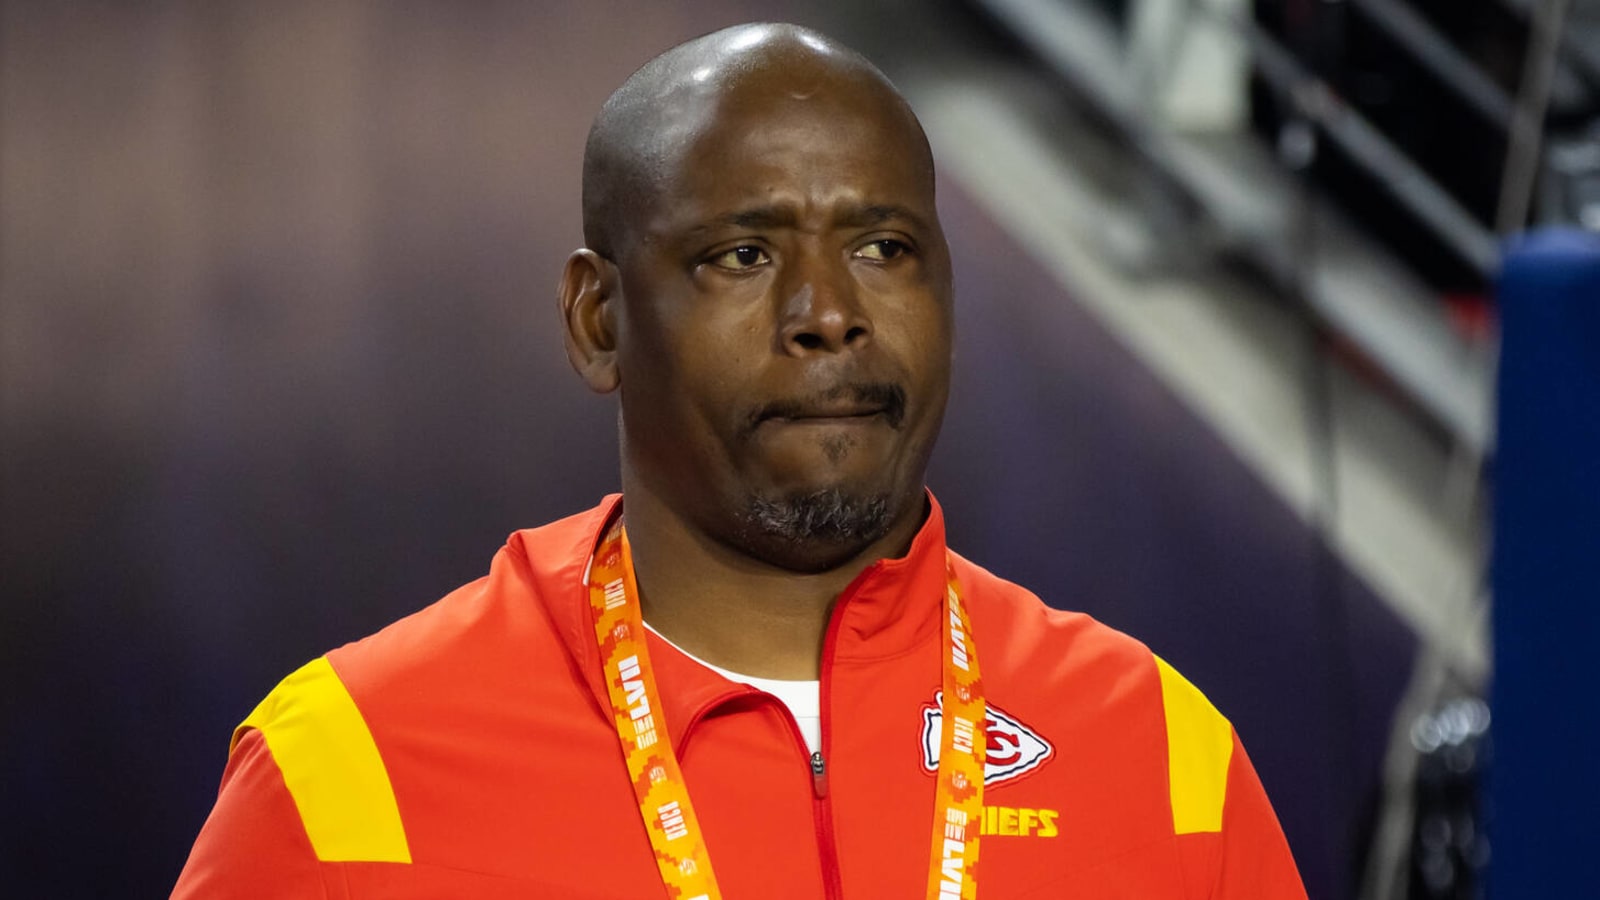 Chiefs DBs coach ripped 49ers offense before interviewing for their DC job